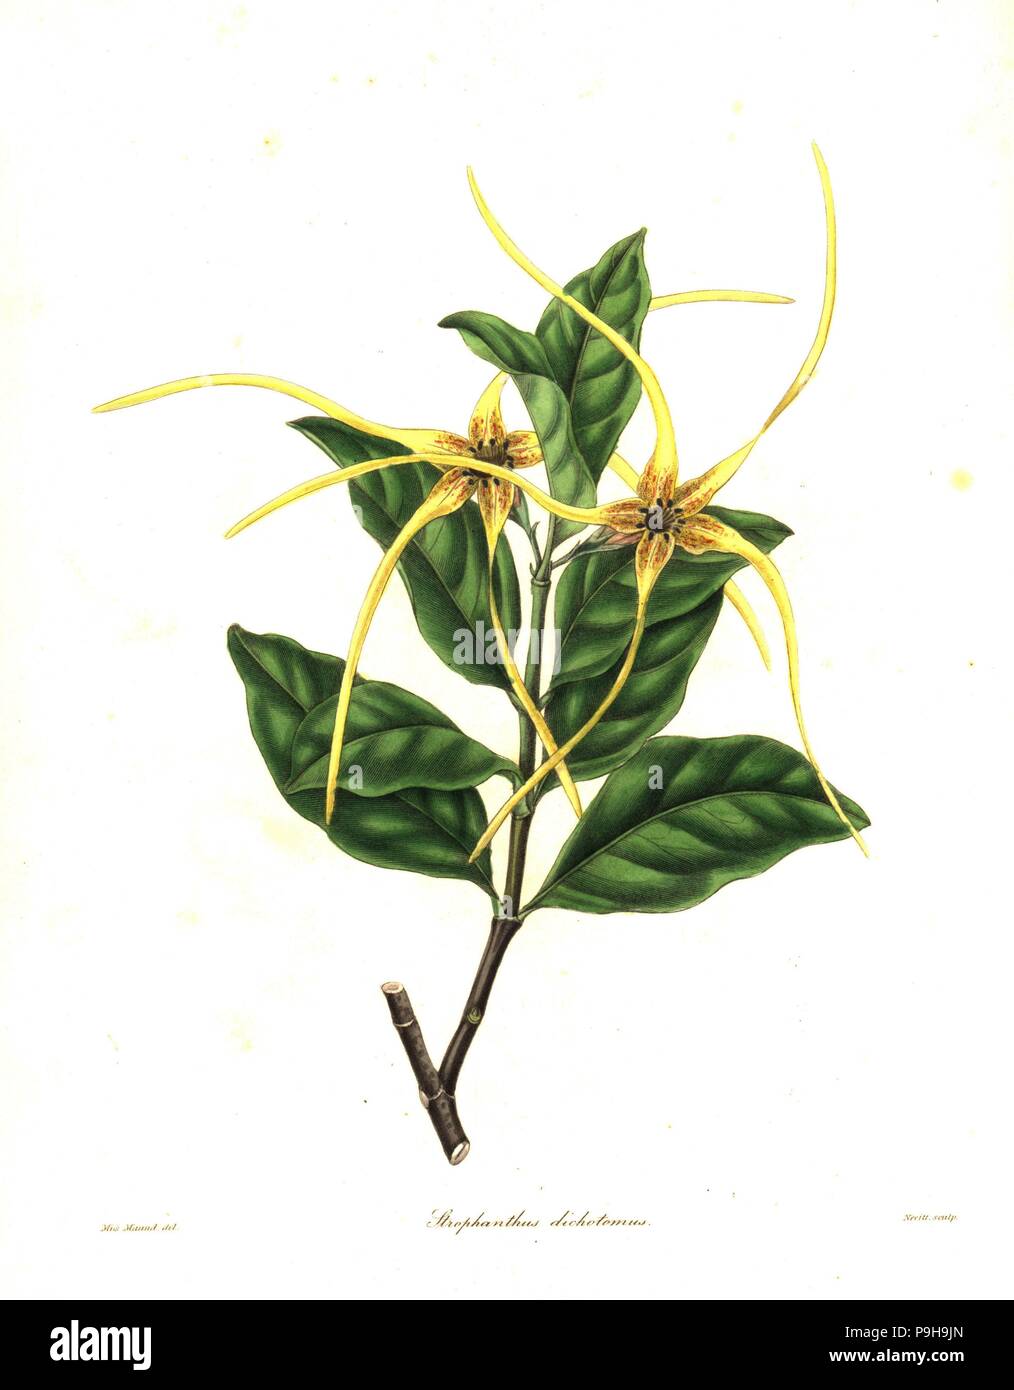 Twisted cord flower, Strophanthus divaricatus (Chinese strophanthus, Strophanthus divergens). Handcoloured copperplate engraving by S. Nevitt after a botanical illustration by Miss Maund from Benjamin Maund and the Rev. John Stevens Henslow's The Botanist, London, 1836. Stock Photo